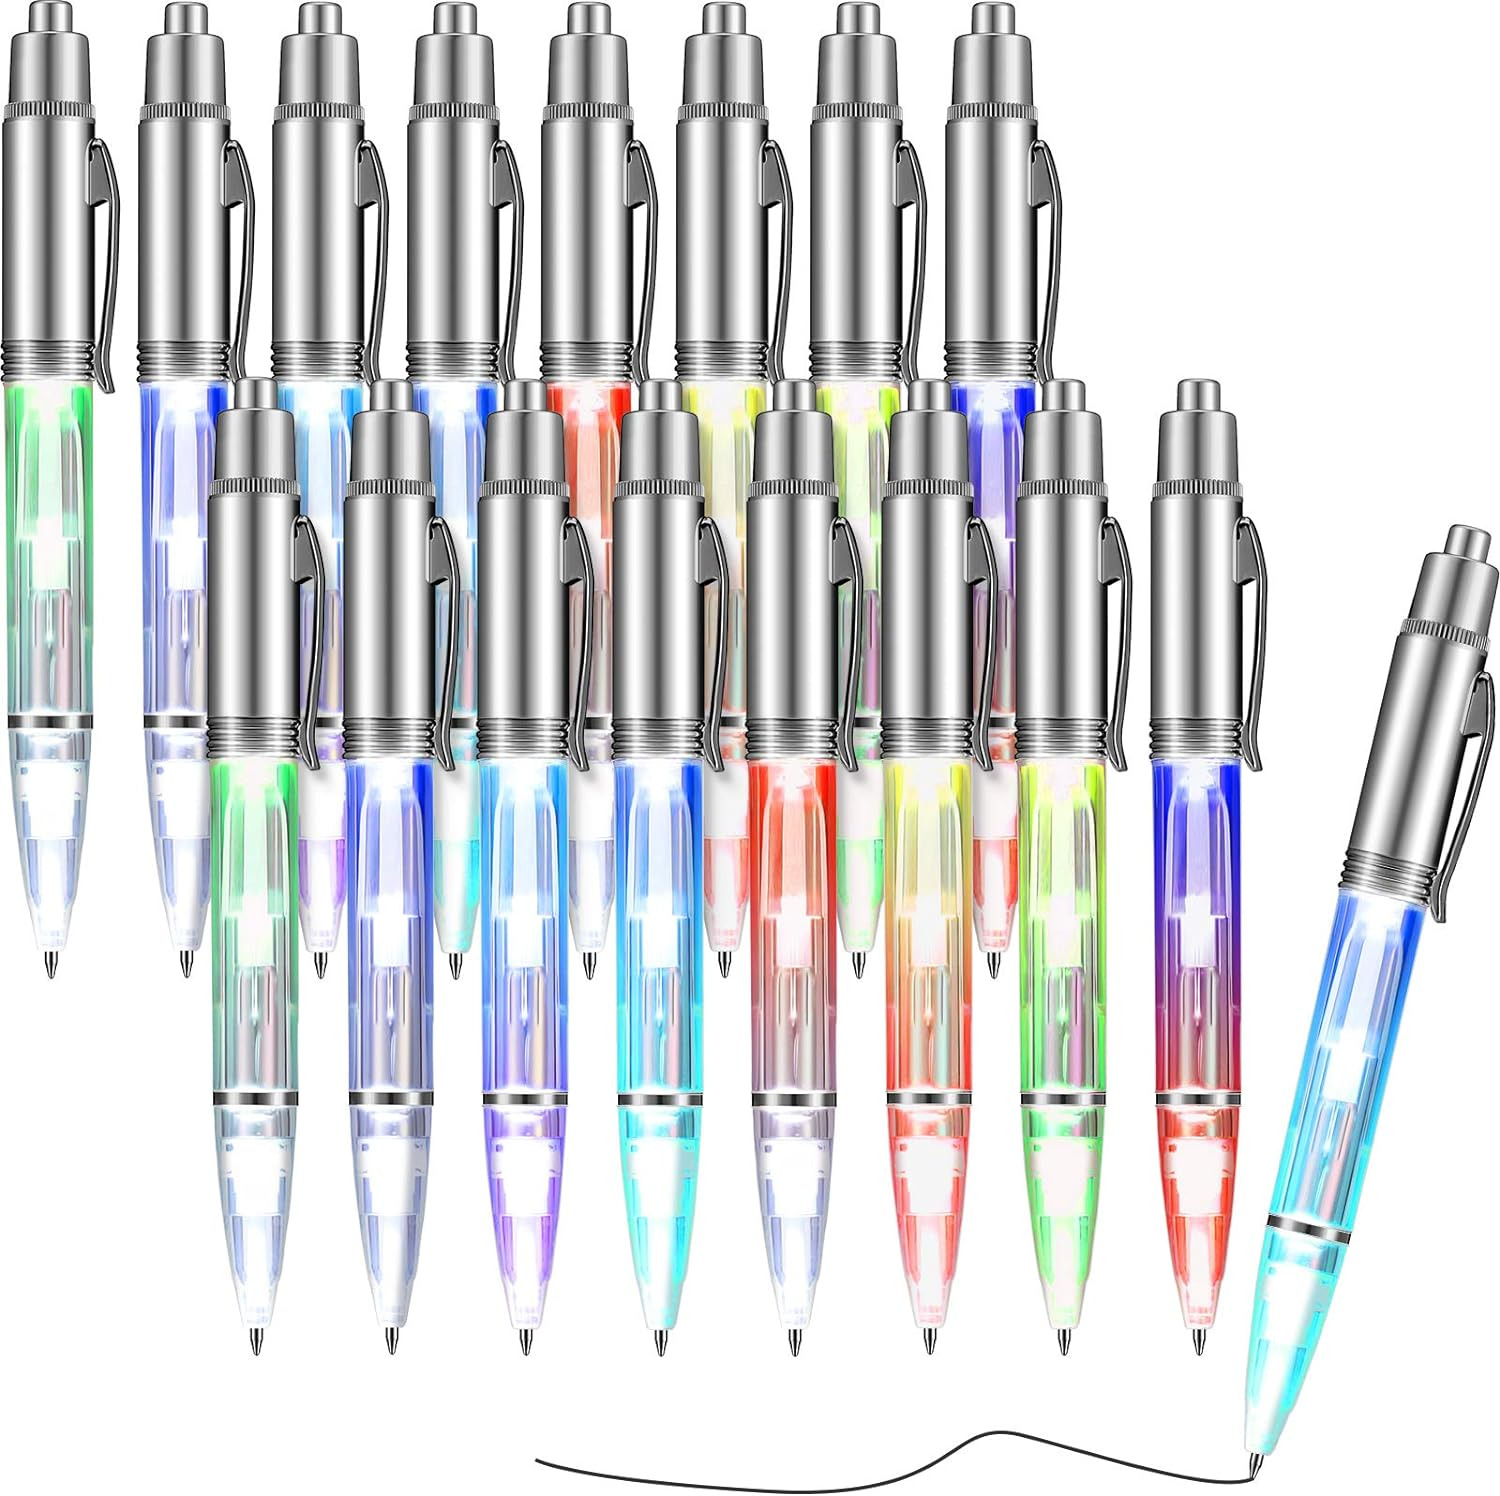 16 Pcs Lighted Tip Pen Writing Ball Point Pen with LED Flashlight